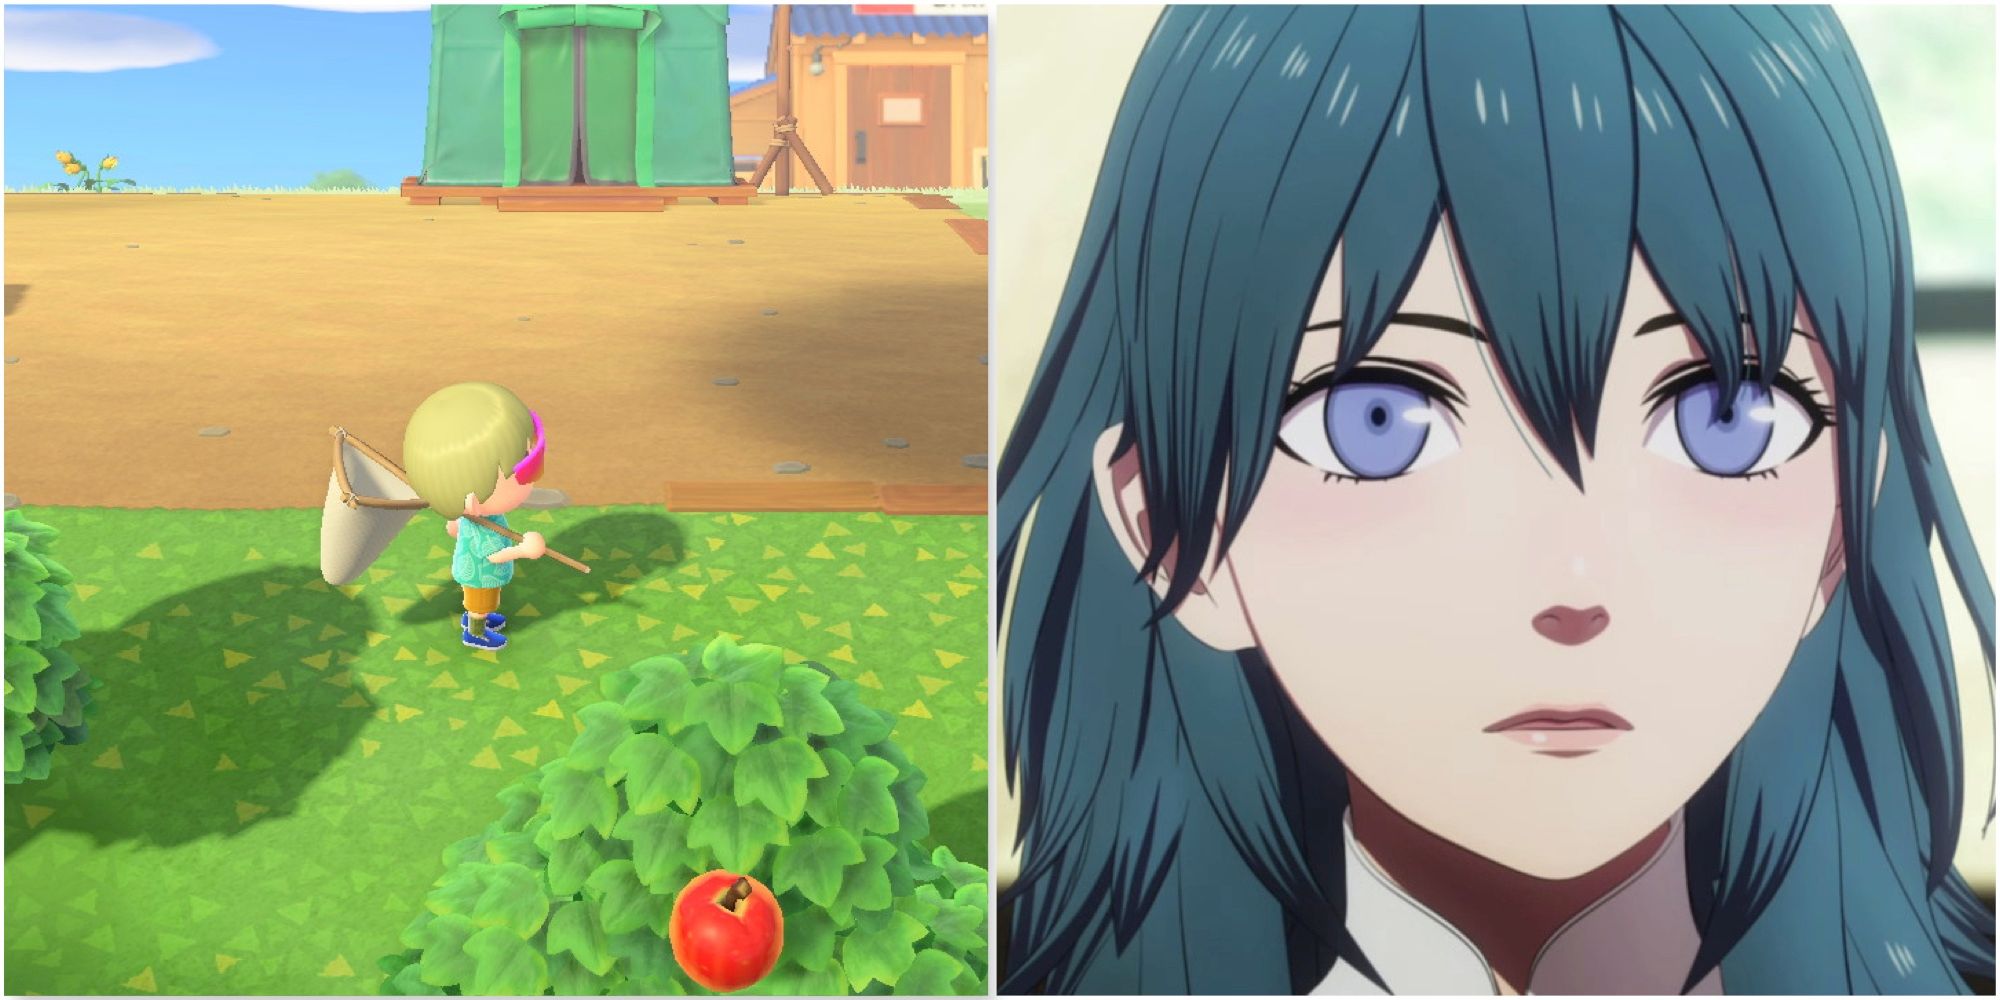 Exploring the world in Animal Crossing New Horizons and Byleth in Fire Emblem Three Houses